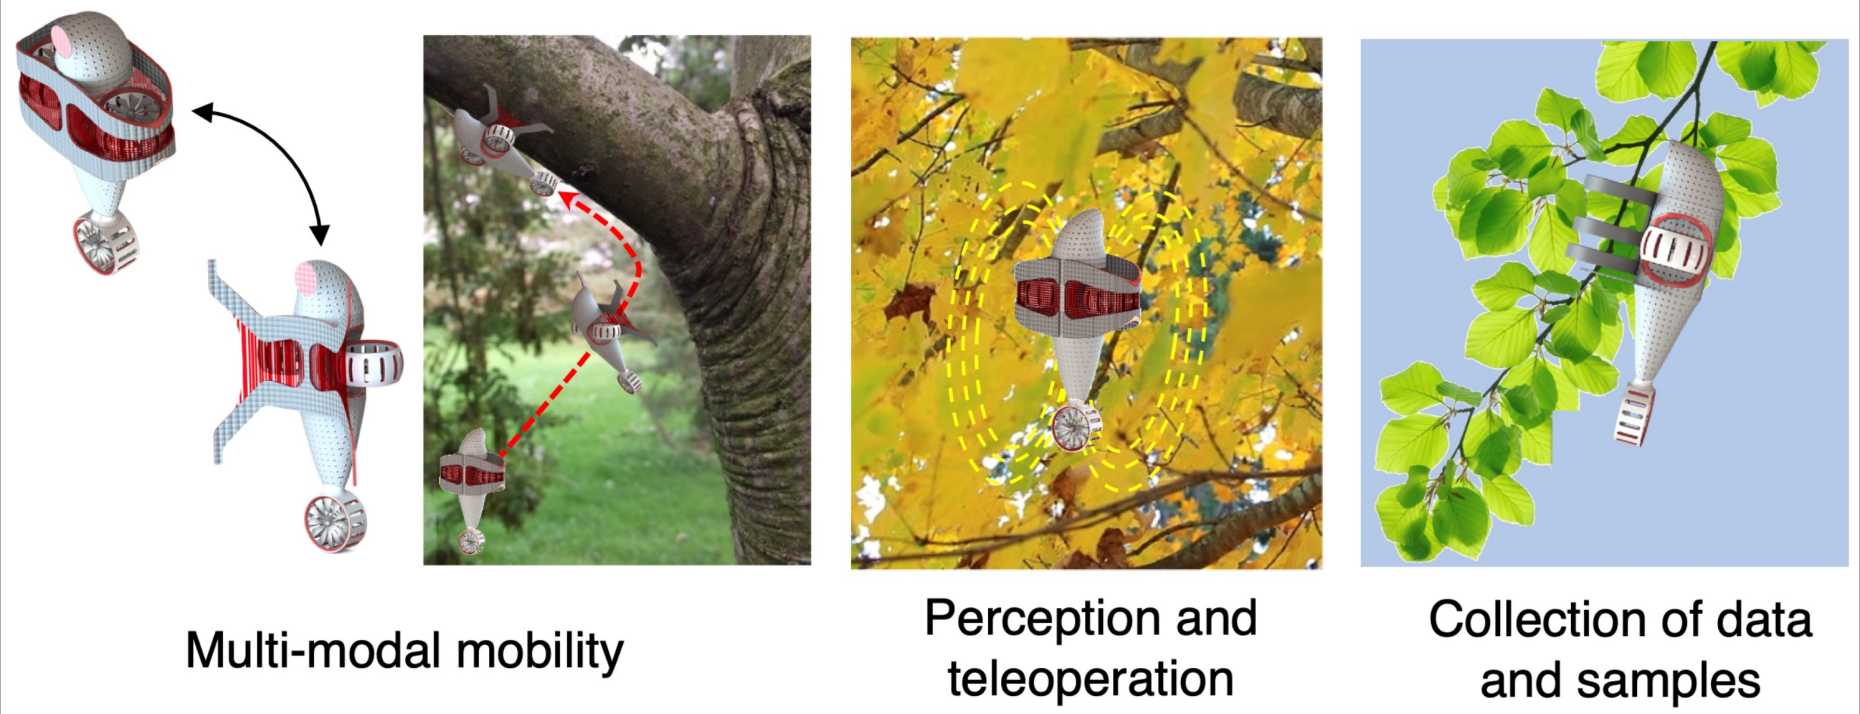 different prototypes of drones: Multi-modal mobility, Perception and teleoperation, Collection of data and samples